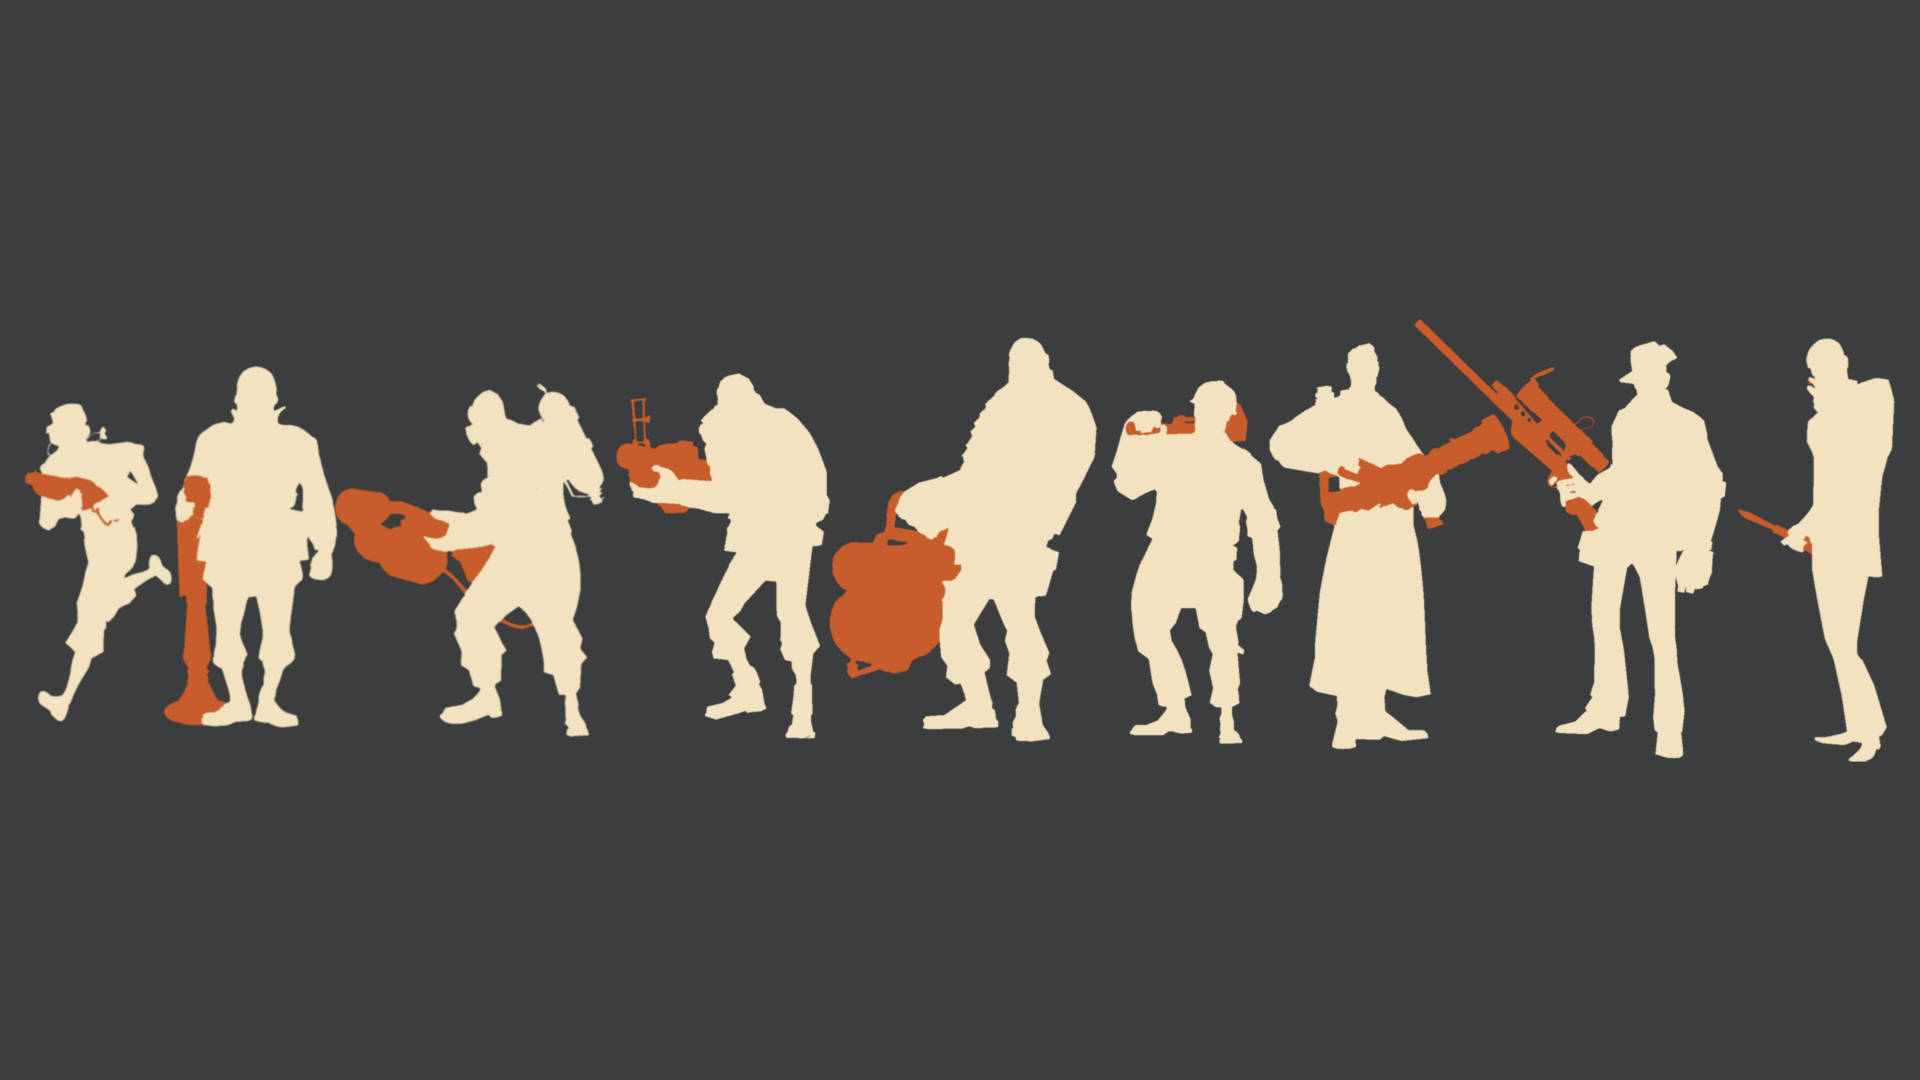 Team Fortress 2 Character Silhouette Wallpaper